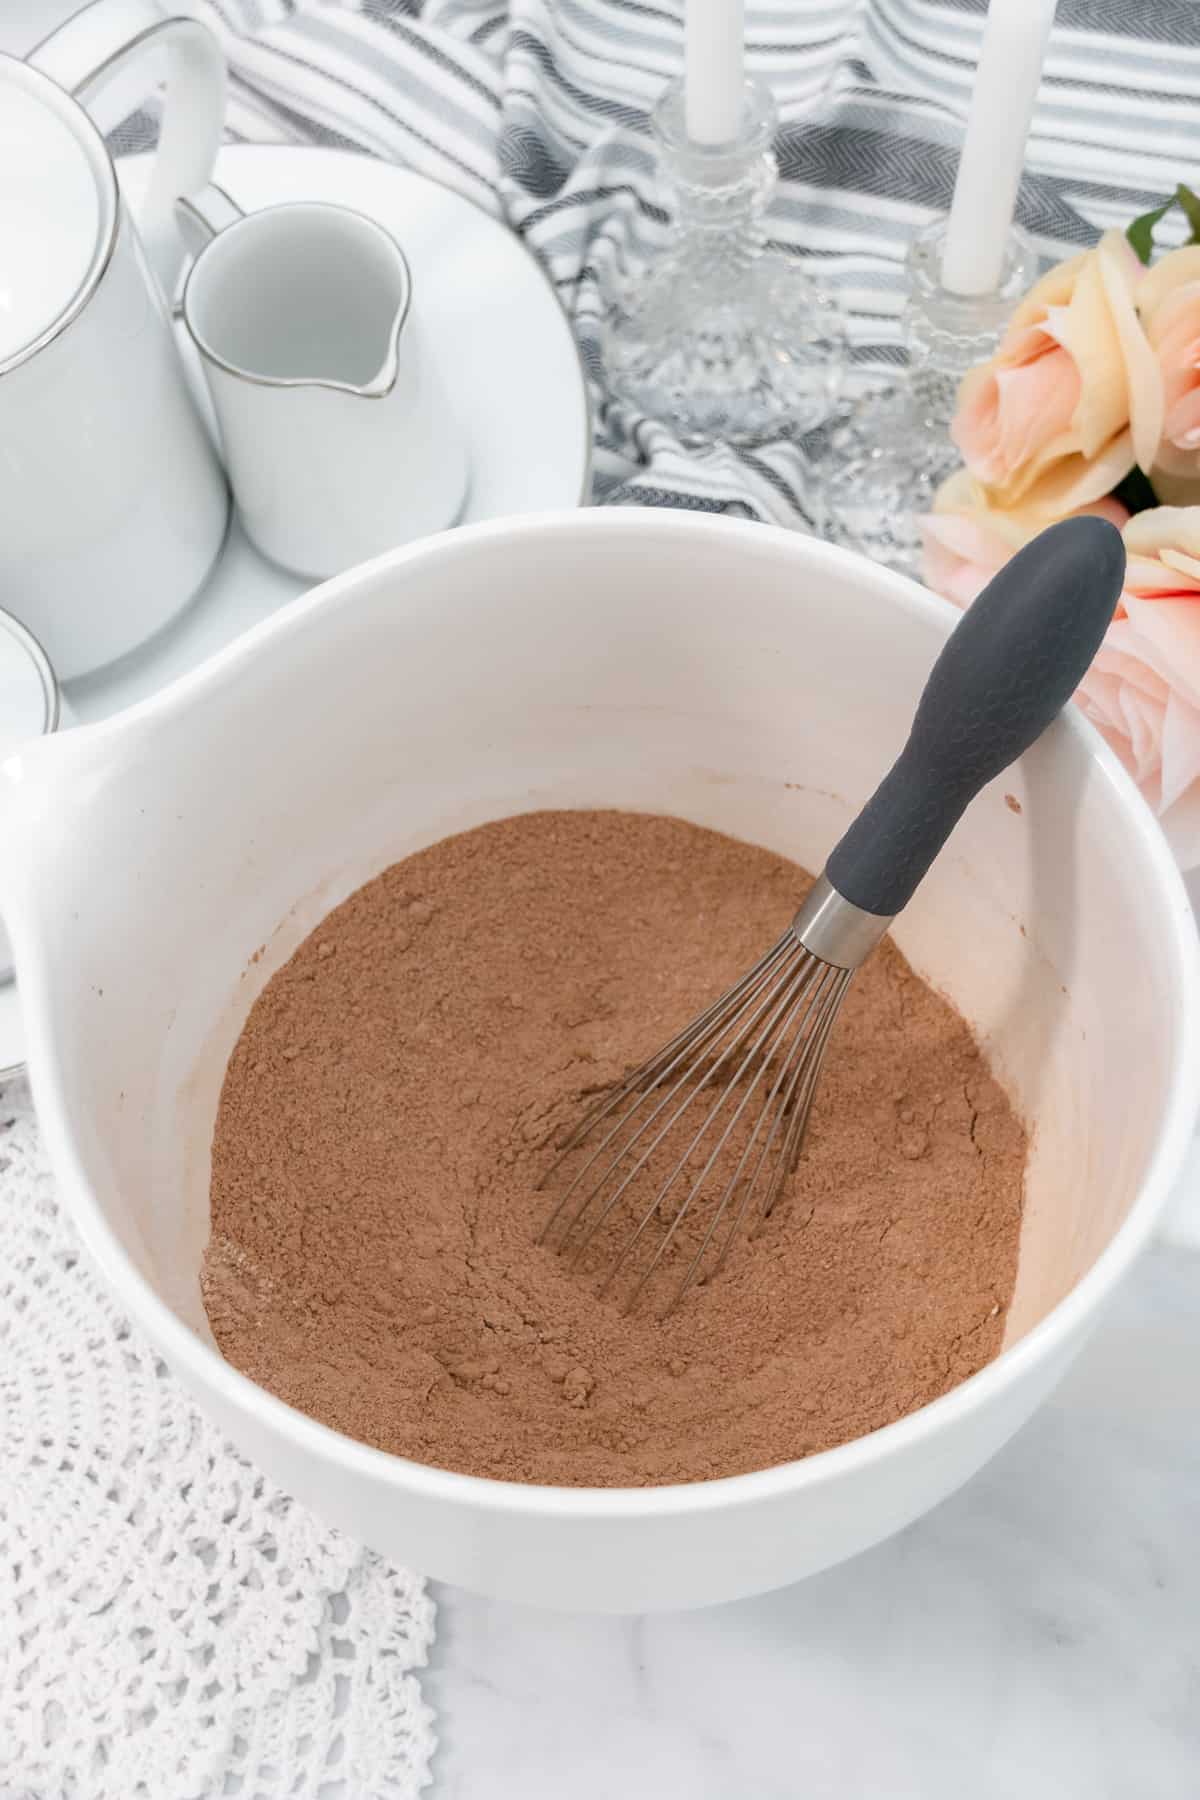 Dry cake batter ingredients in a white bowl with a whisk.